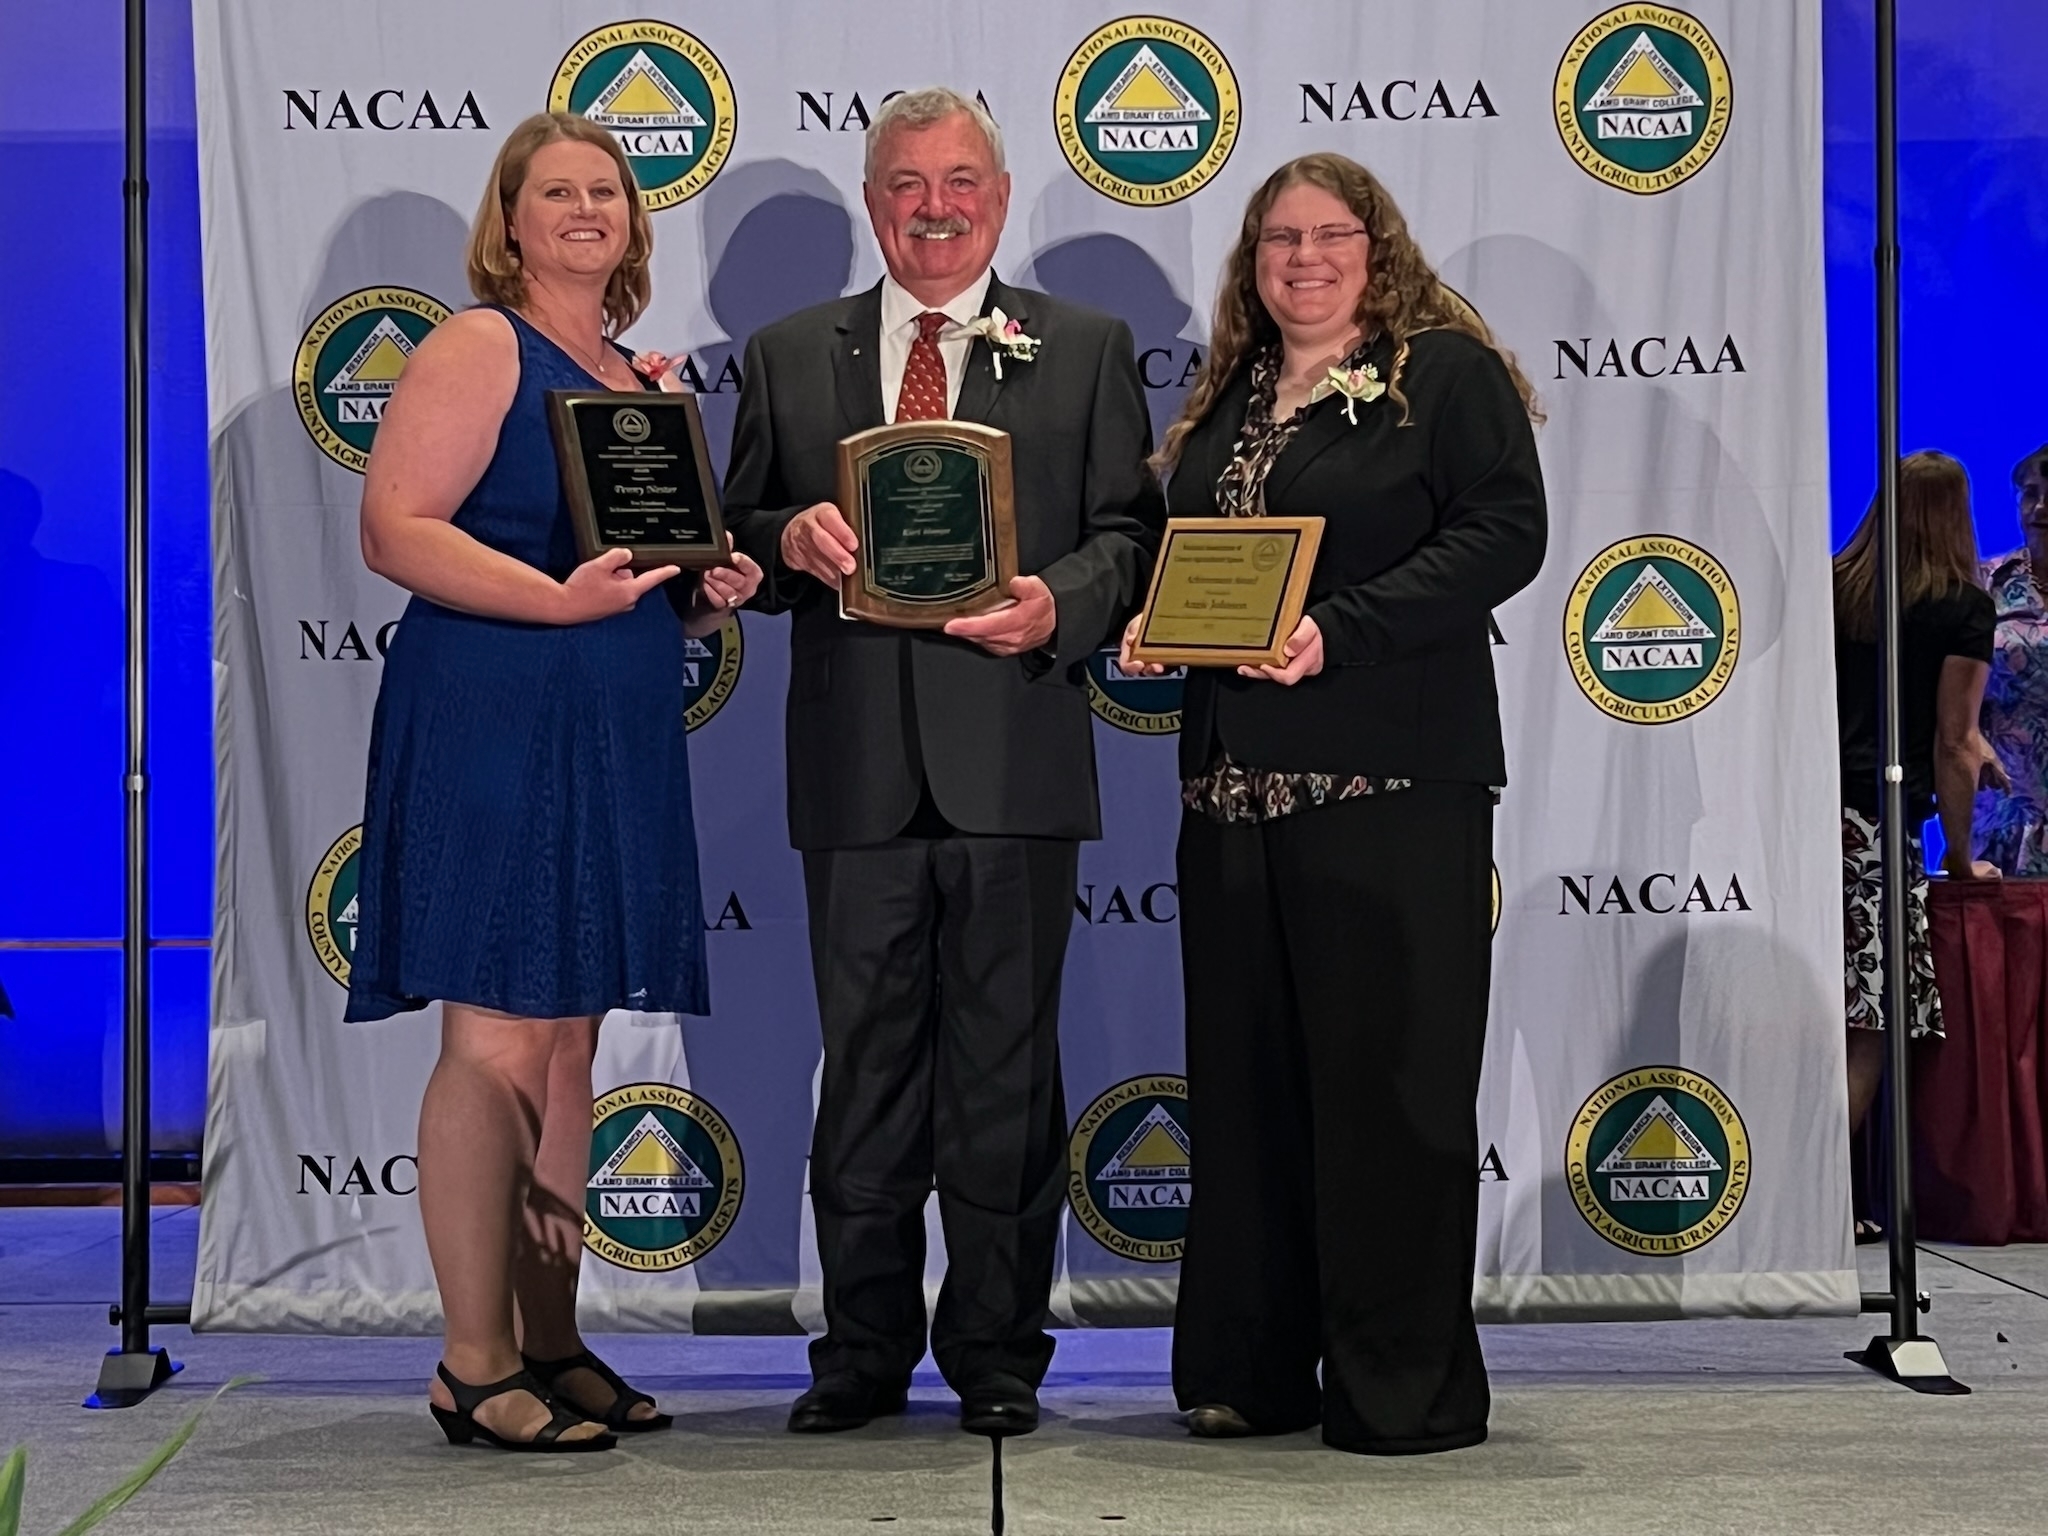 Penny Nester, Karl Hoppe and Angie Johnson were honored for their Extension work and service at the National Association of County Agricultural Agents' conference. (NDSU photo)